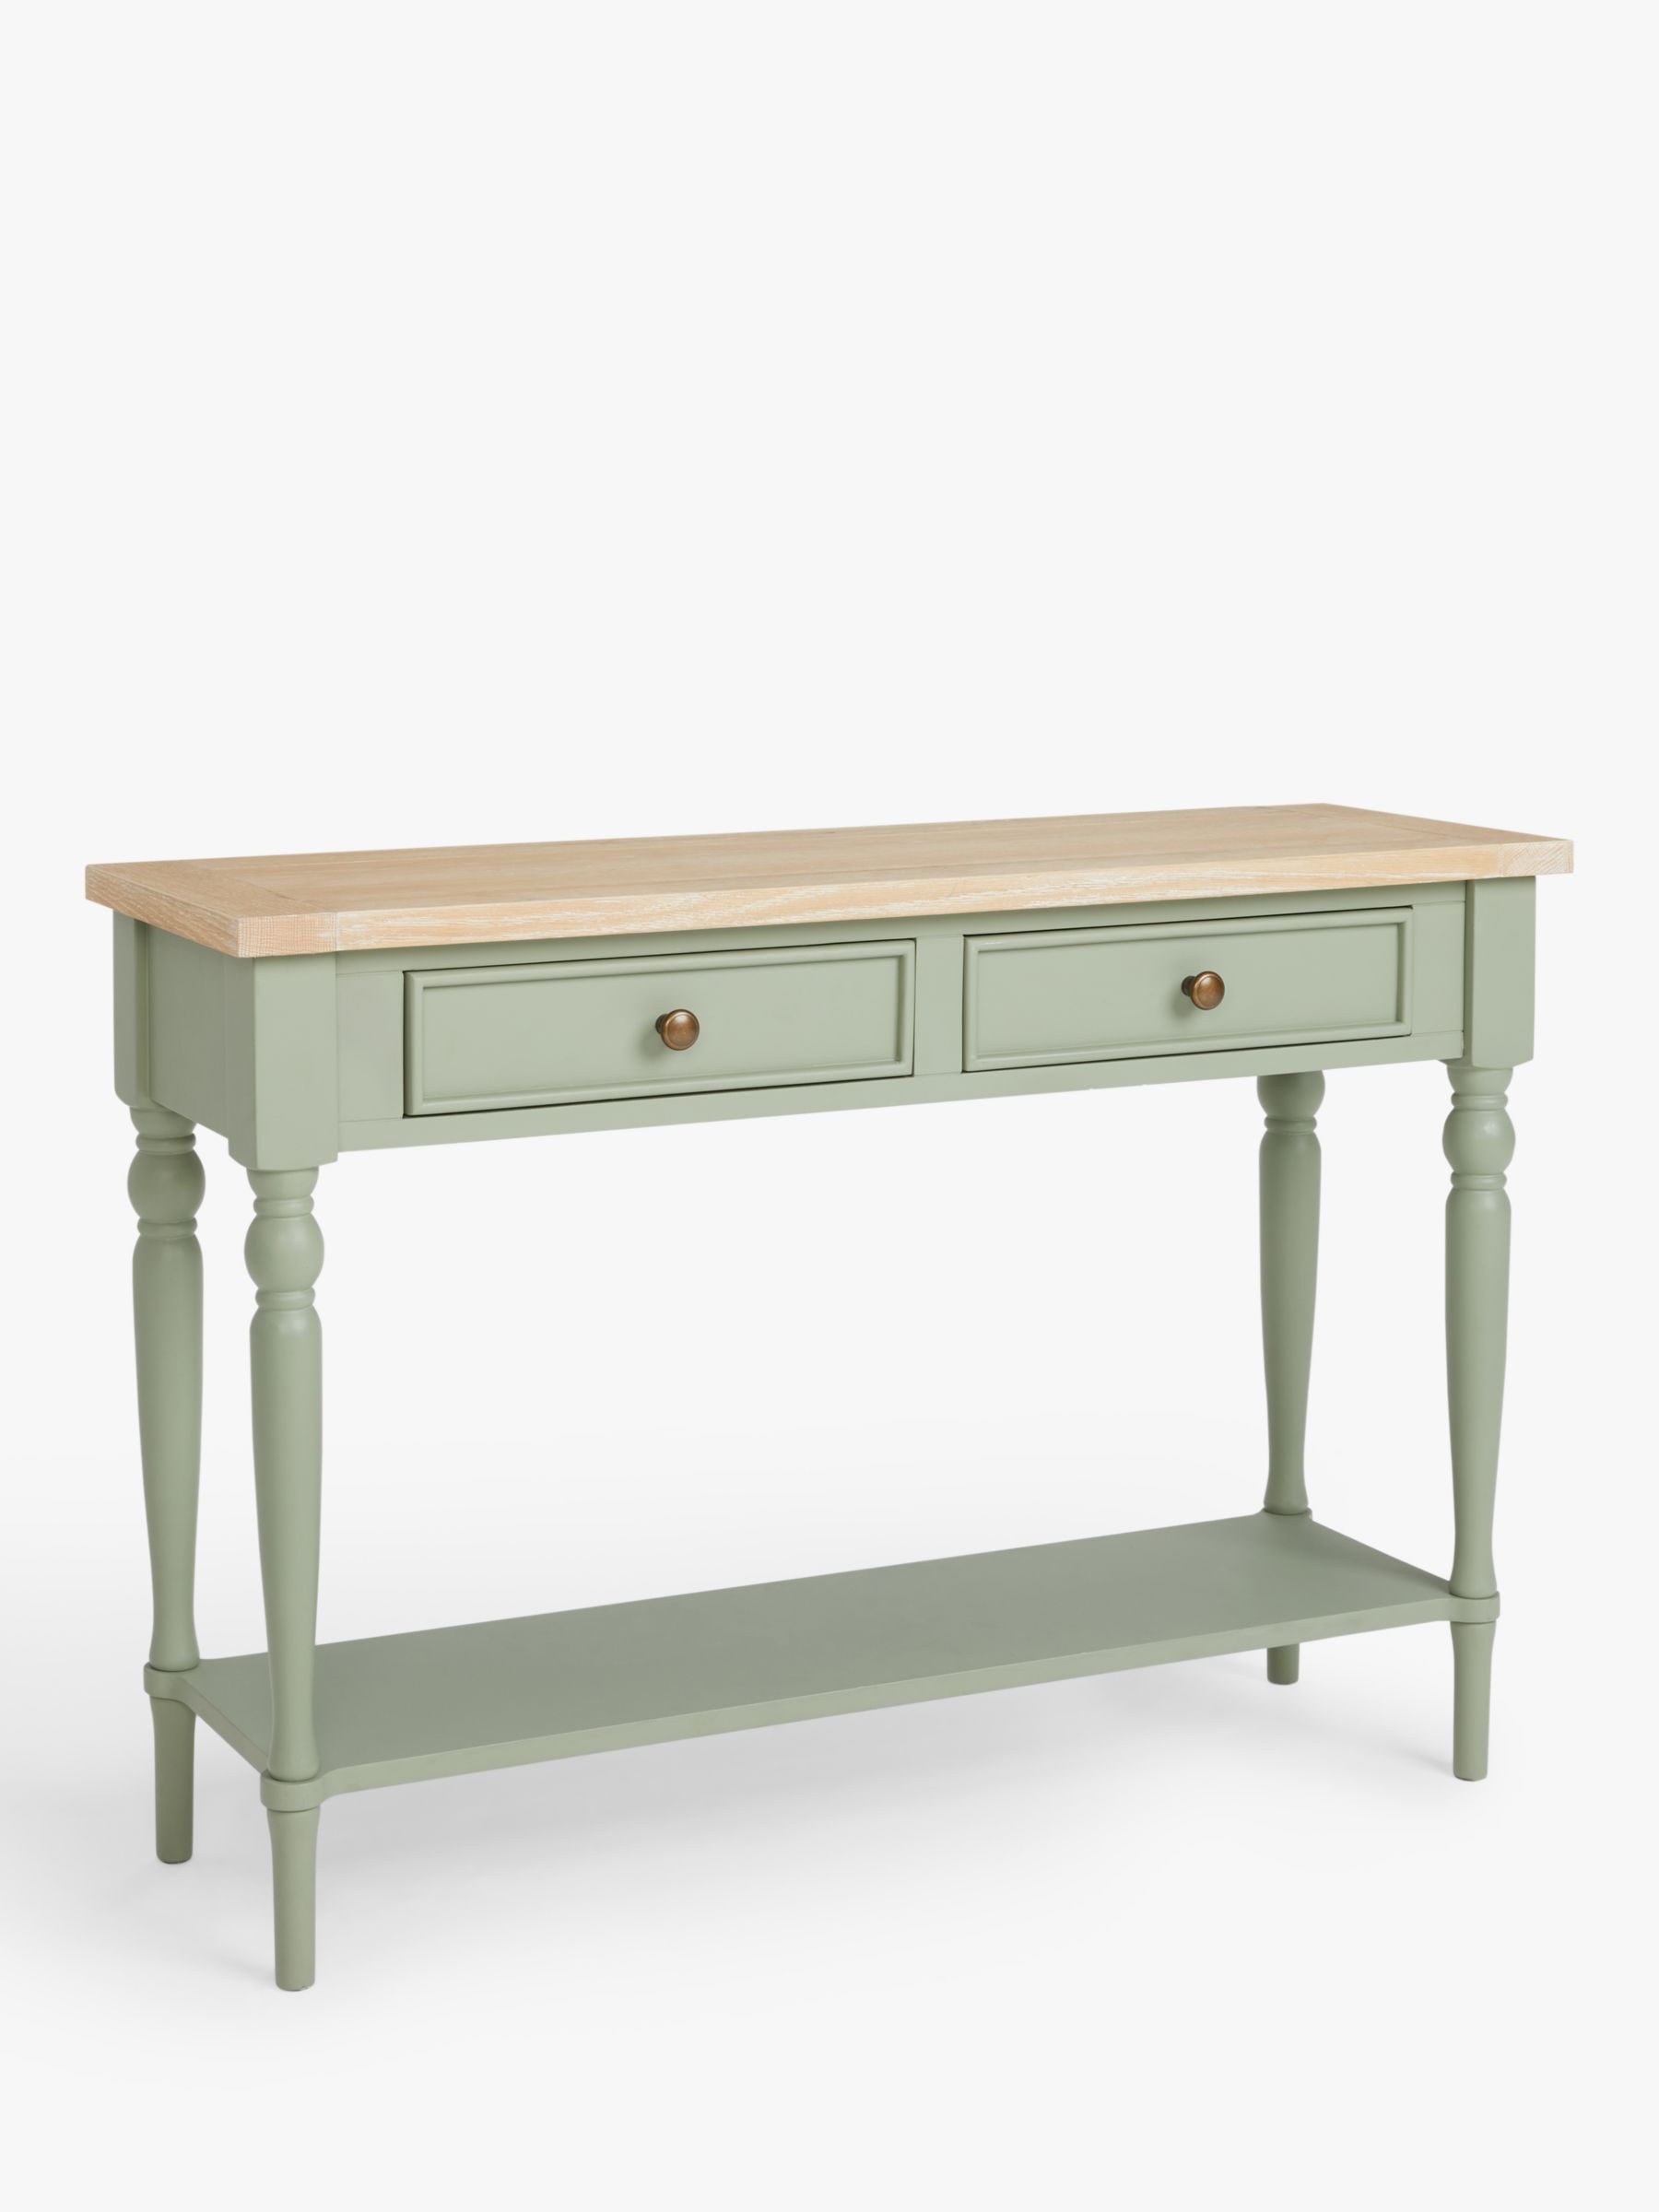 Photo of John lewis foxmoor console table fsc-certified -acacia wood- sage green